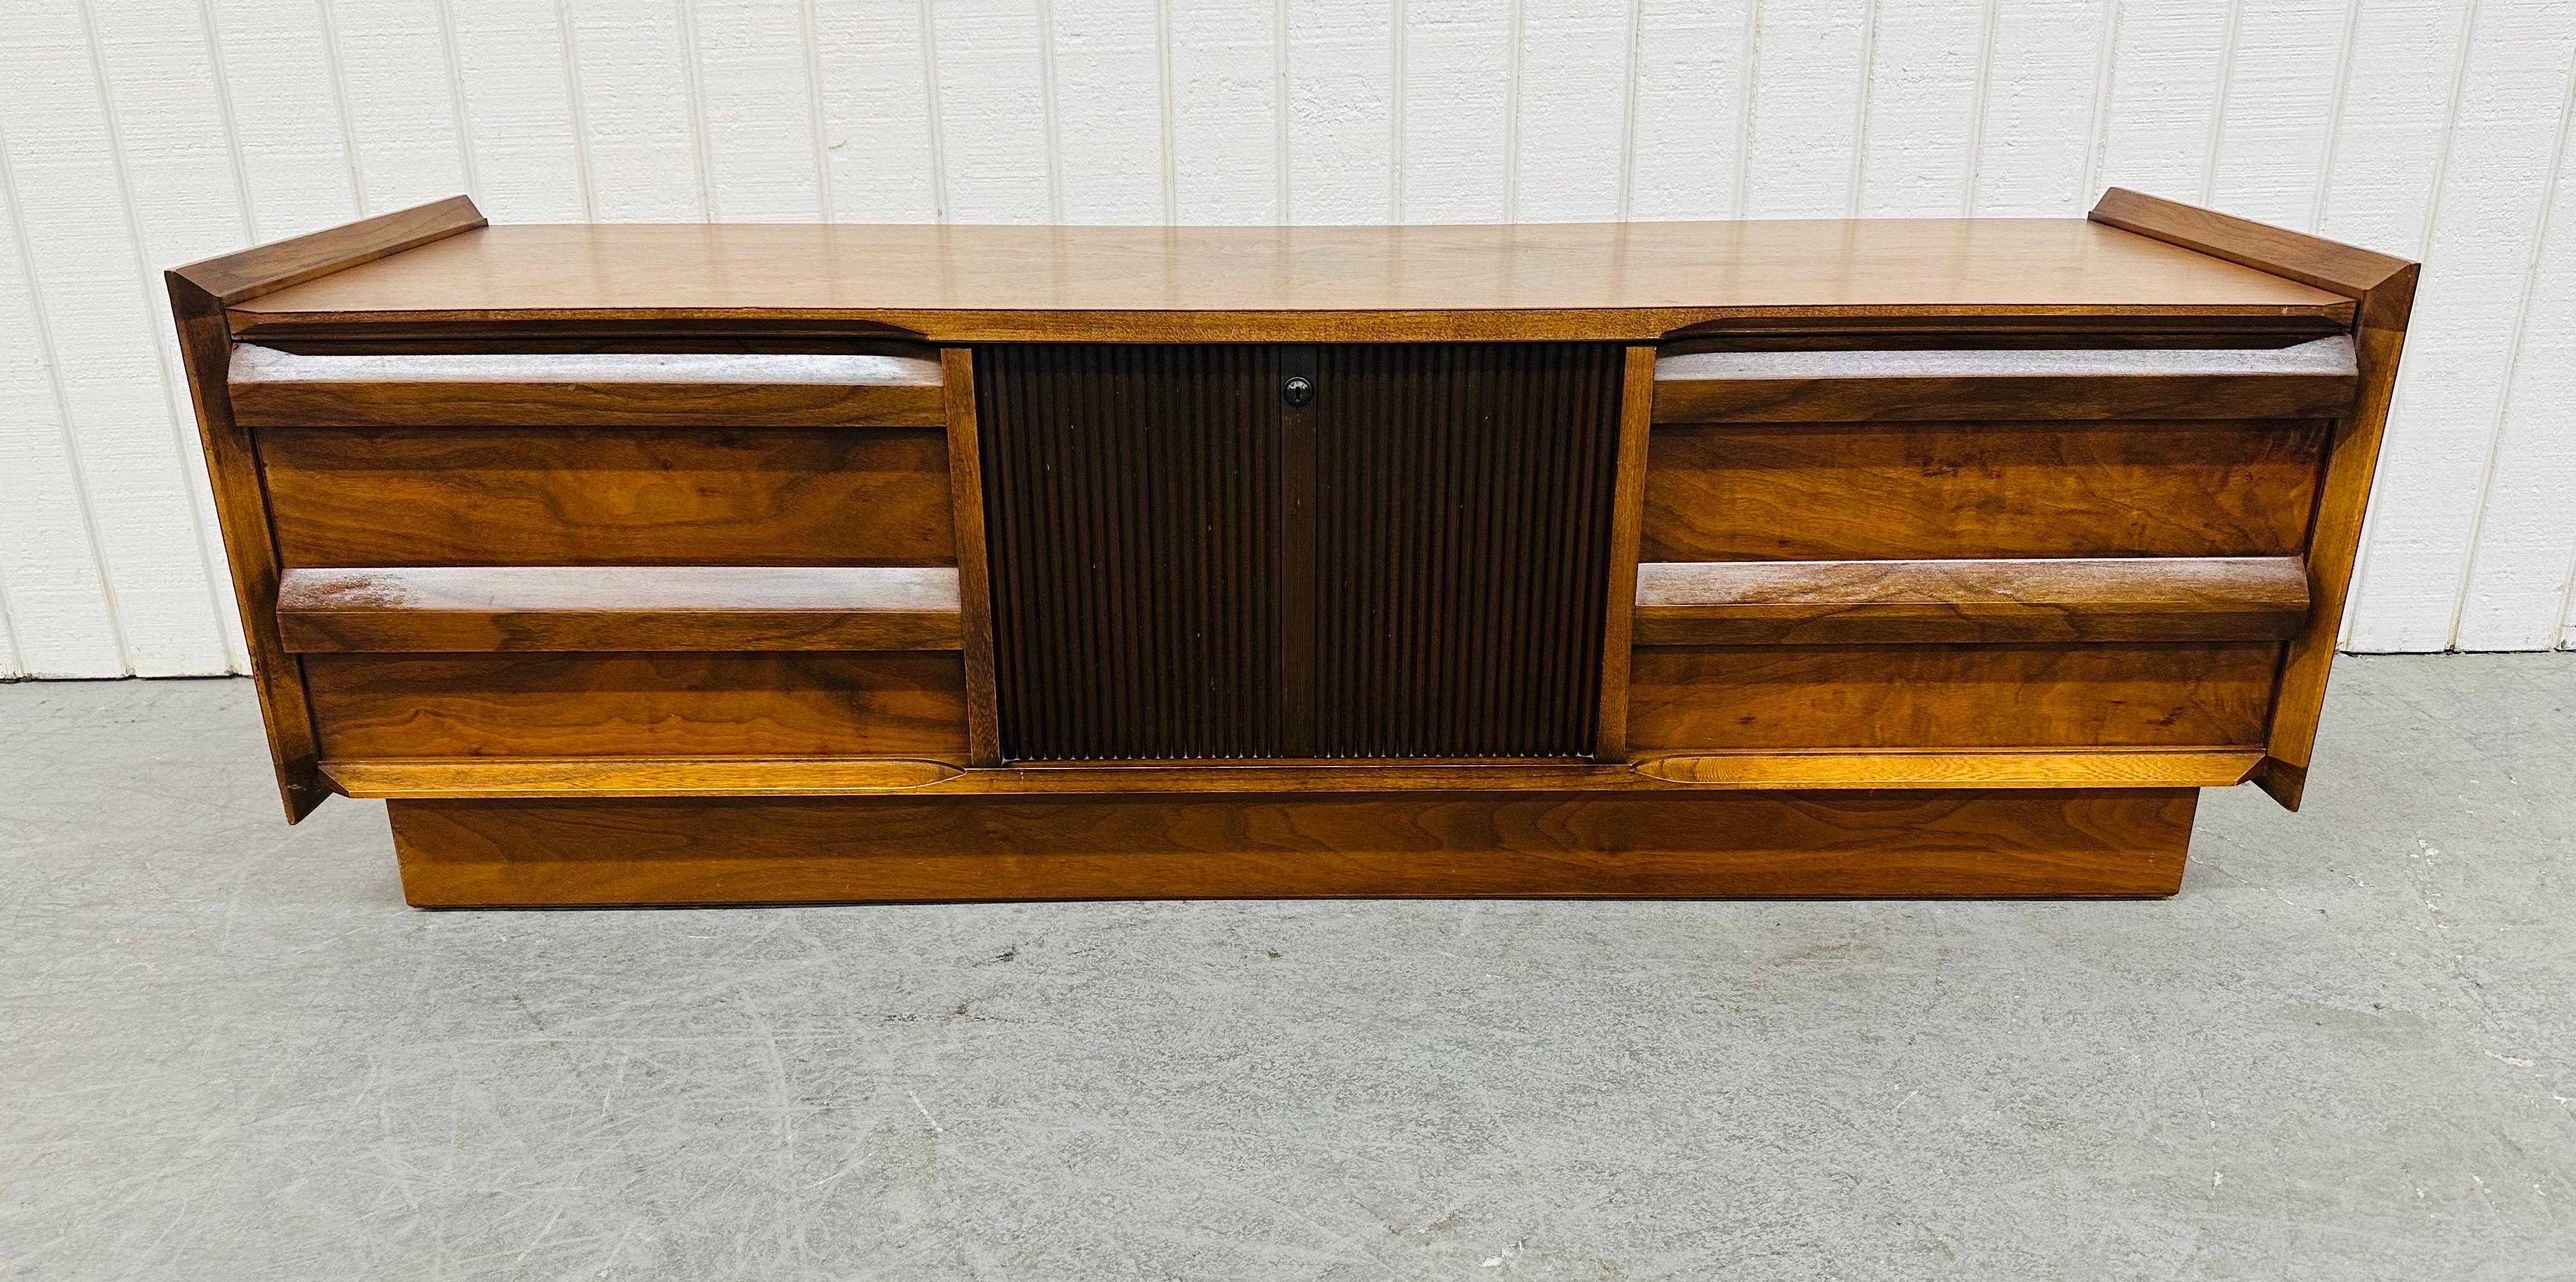 This listing is for a Mid-Century Modern Lane “1st Edition” Walnut Cedar Chest. Featuring a straight line design, louver and reeded front, rectangular walnut top, original push button lock that opens the top up, cedar lined interior storage space,